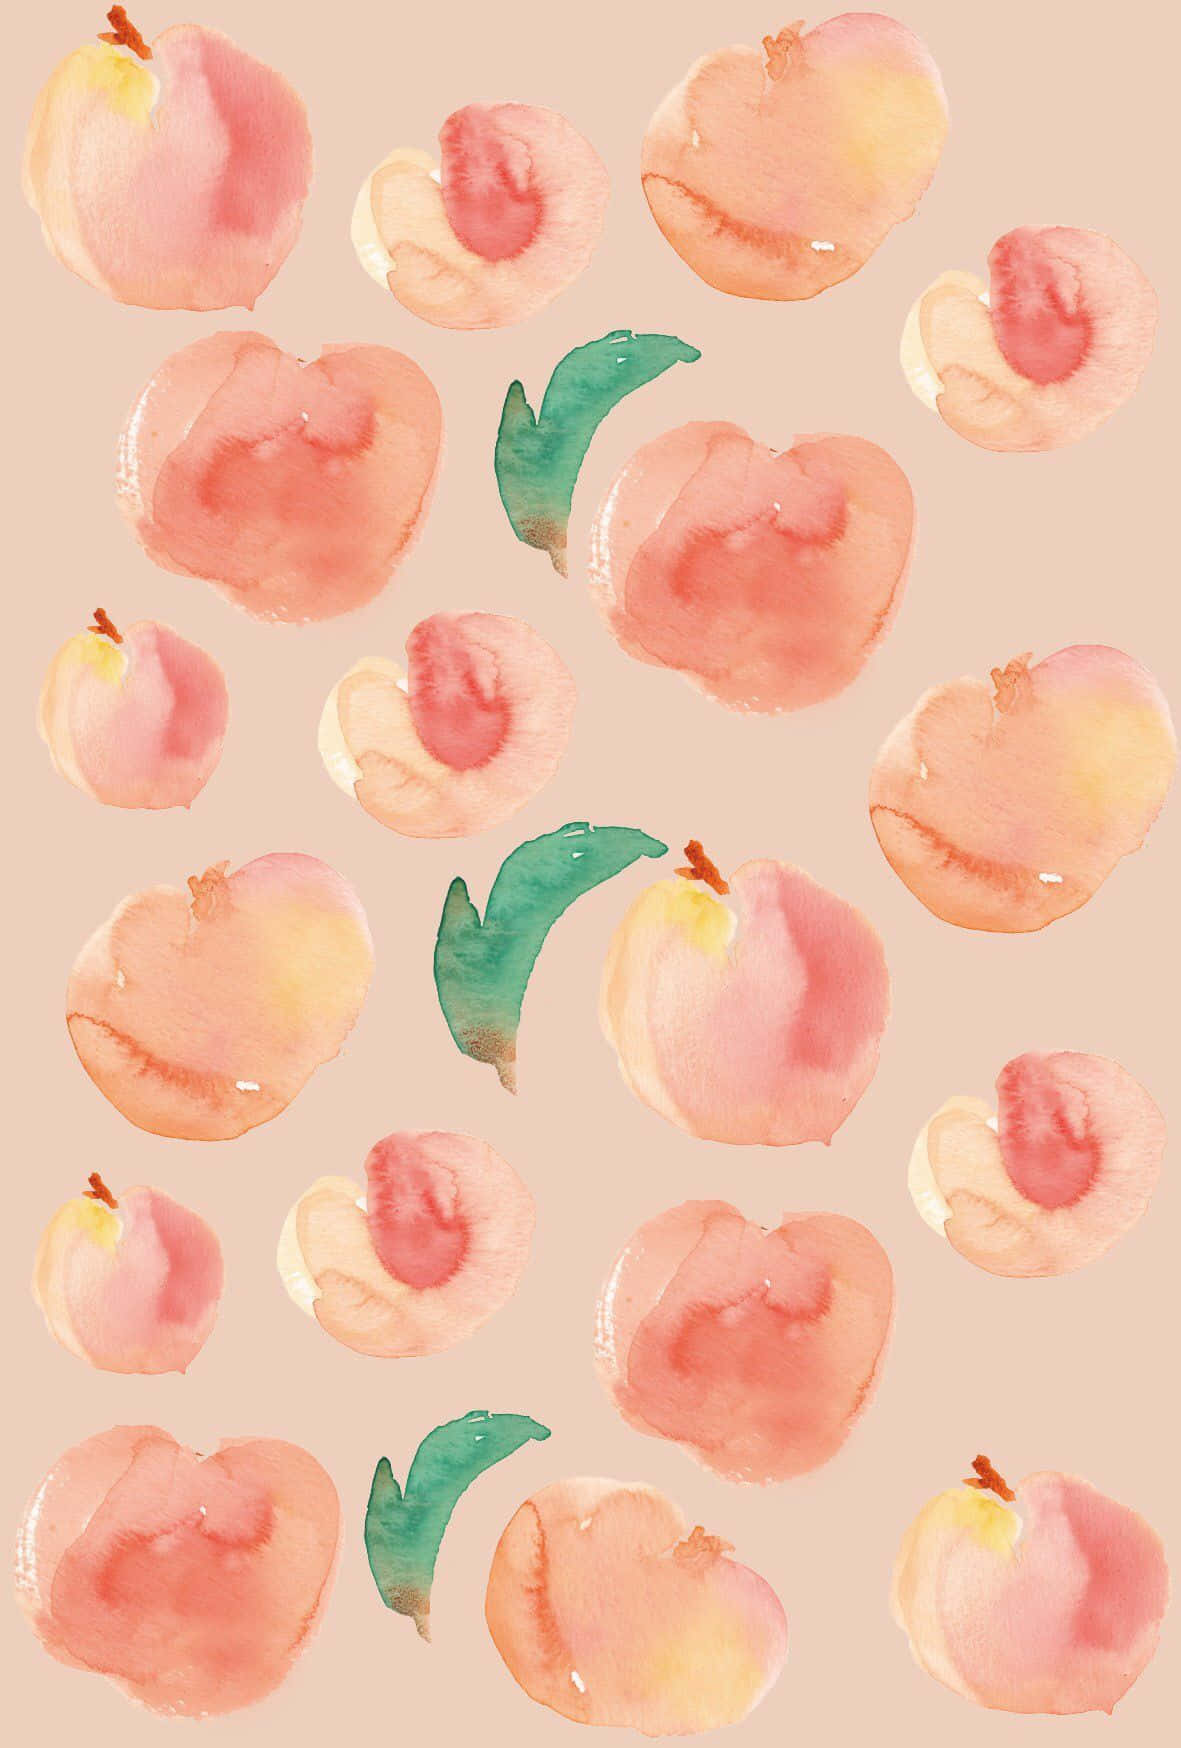 Upgrade to the New Peach Iphone Wallpaper